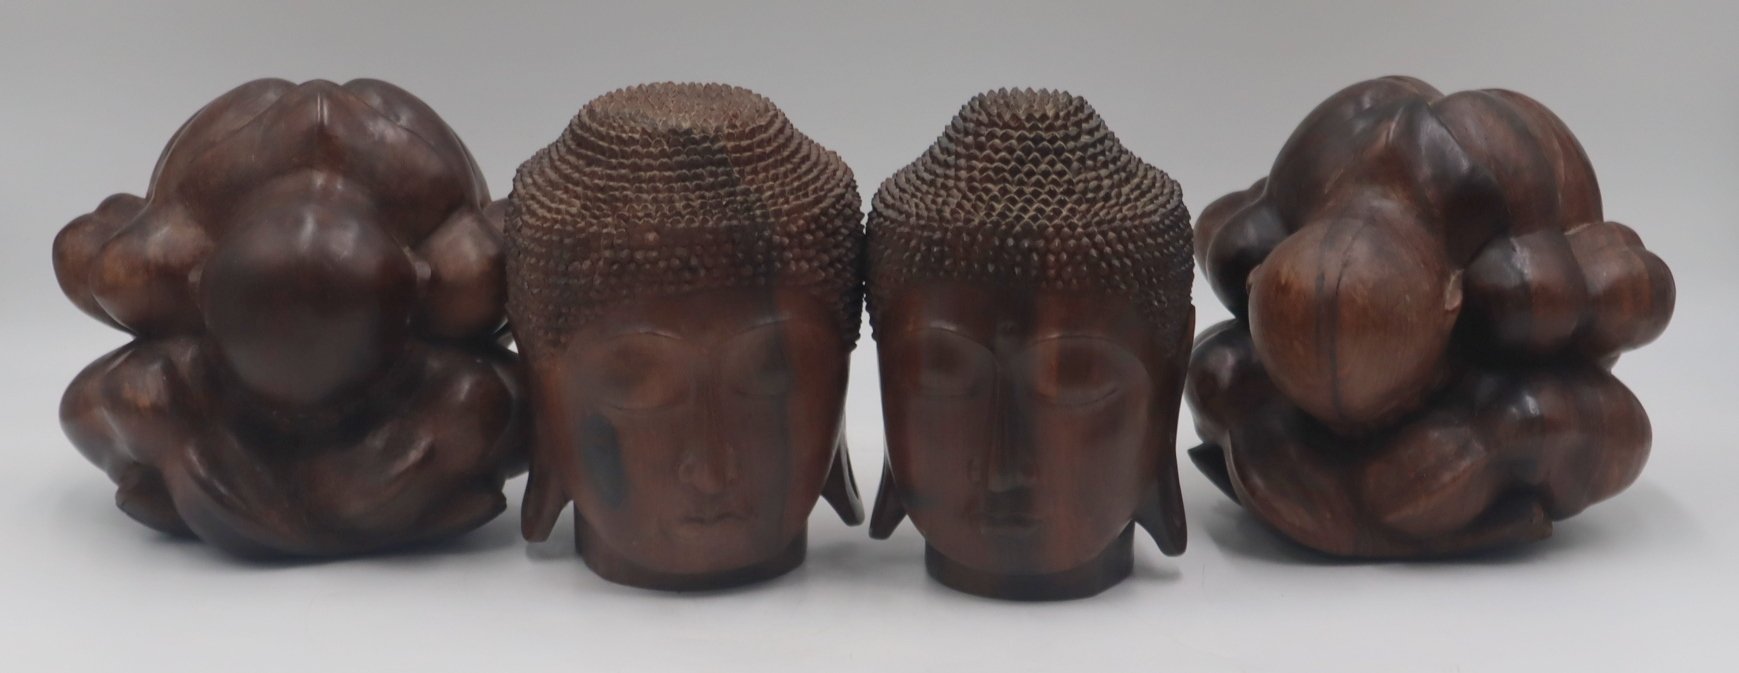 COLLECTION OF ASIAN WOOD CARVINGS  3b3765